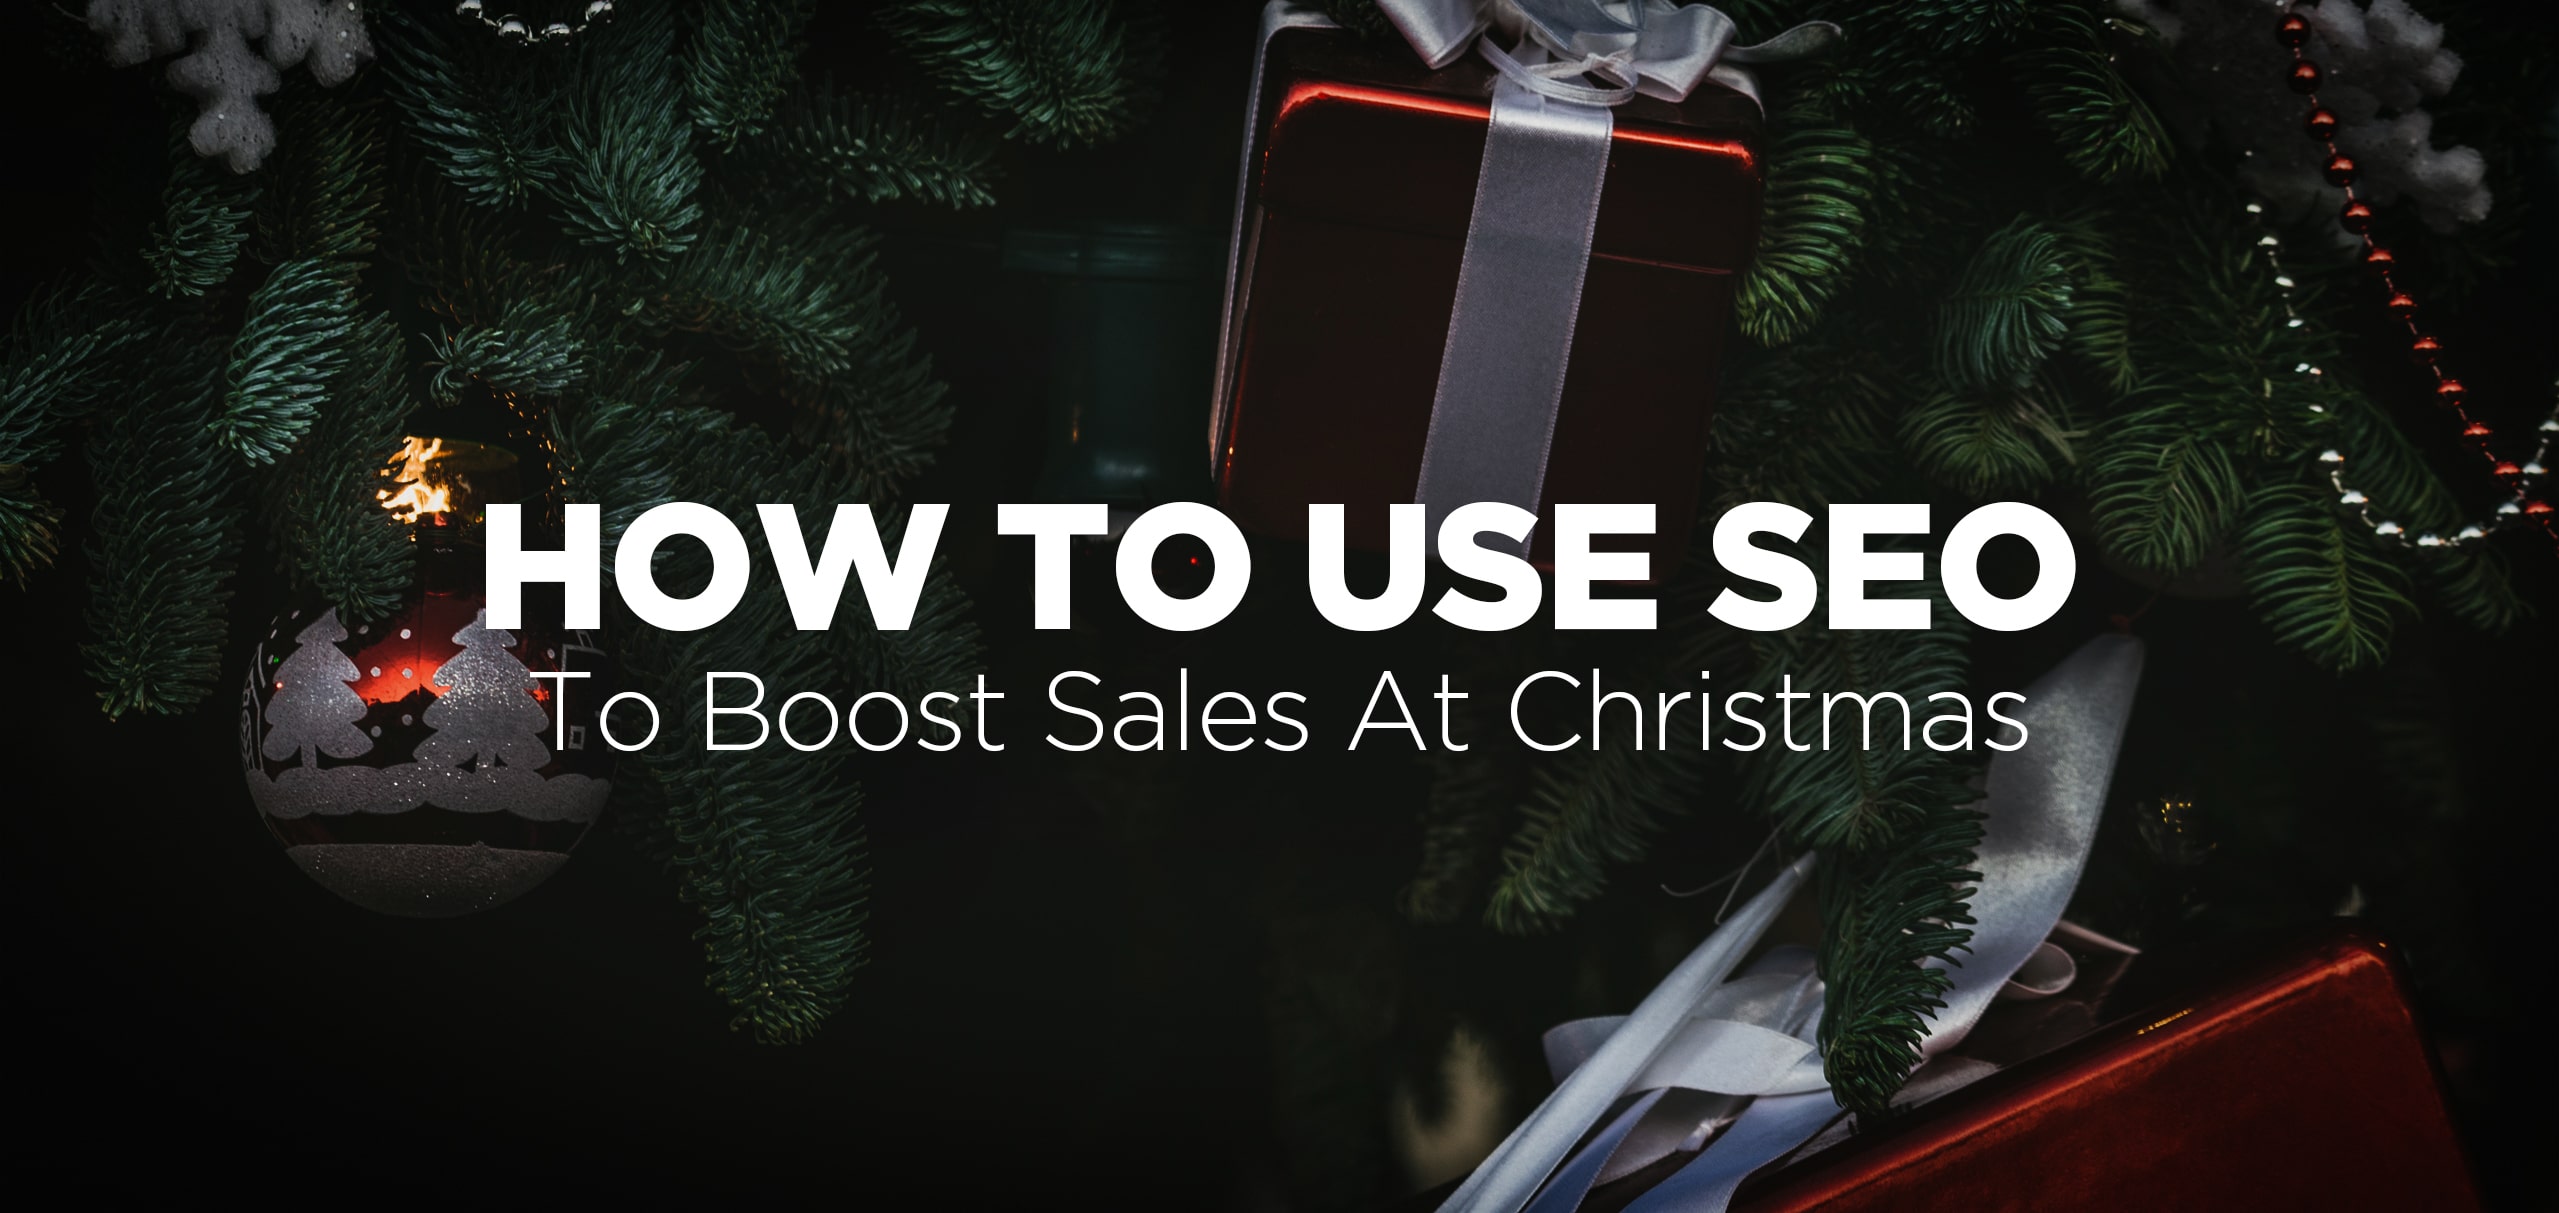 How to use SEO to boost sales at Christmas